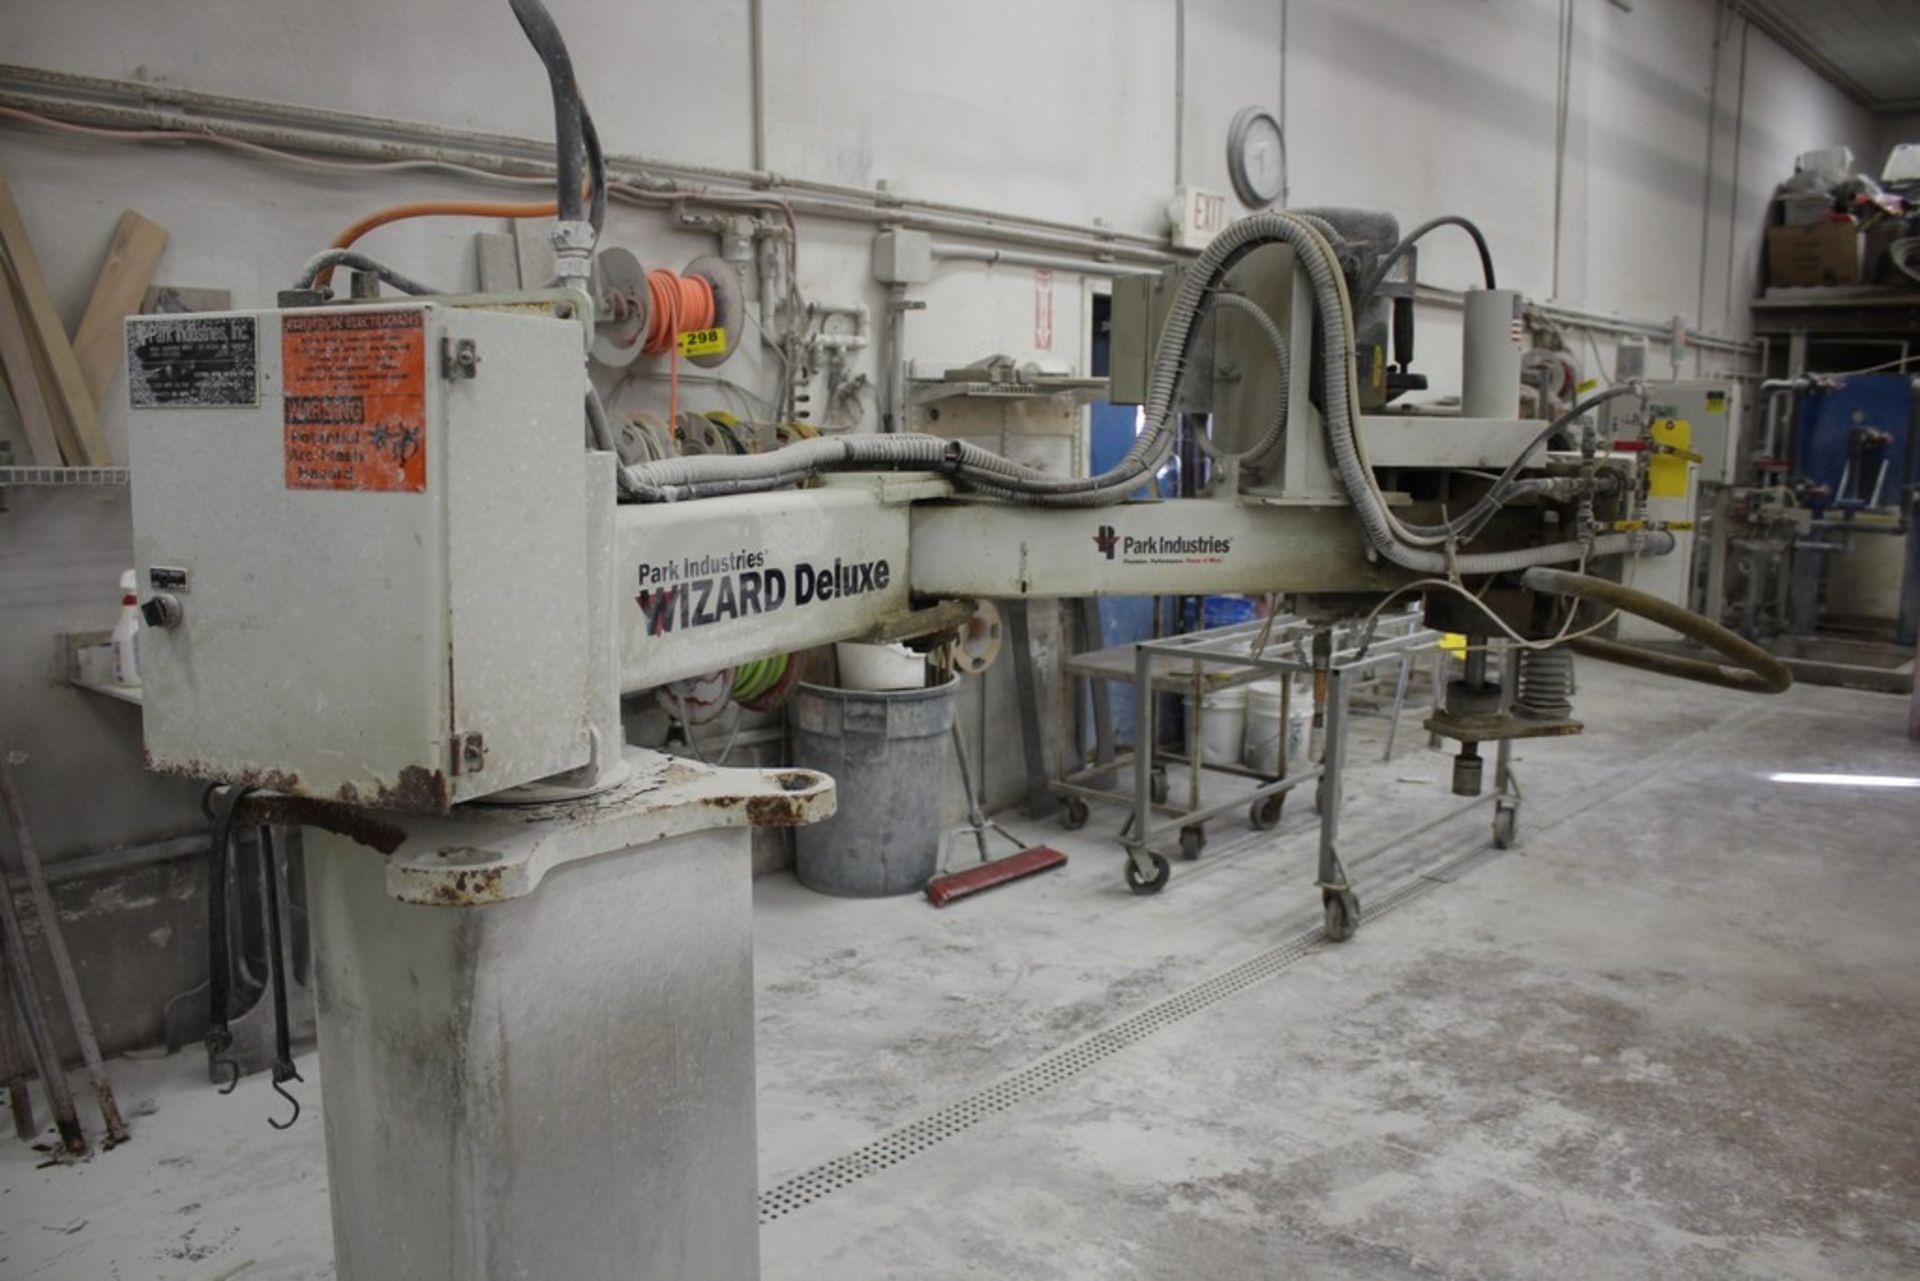 PARK INDUSTRIES MODEL WIZARD DELUXE RADIAL ARM WORKSTATION - Image 15 of 16